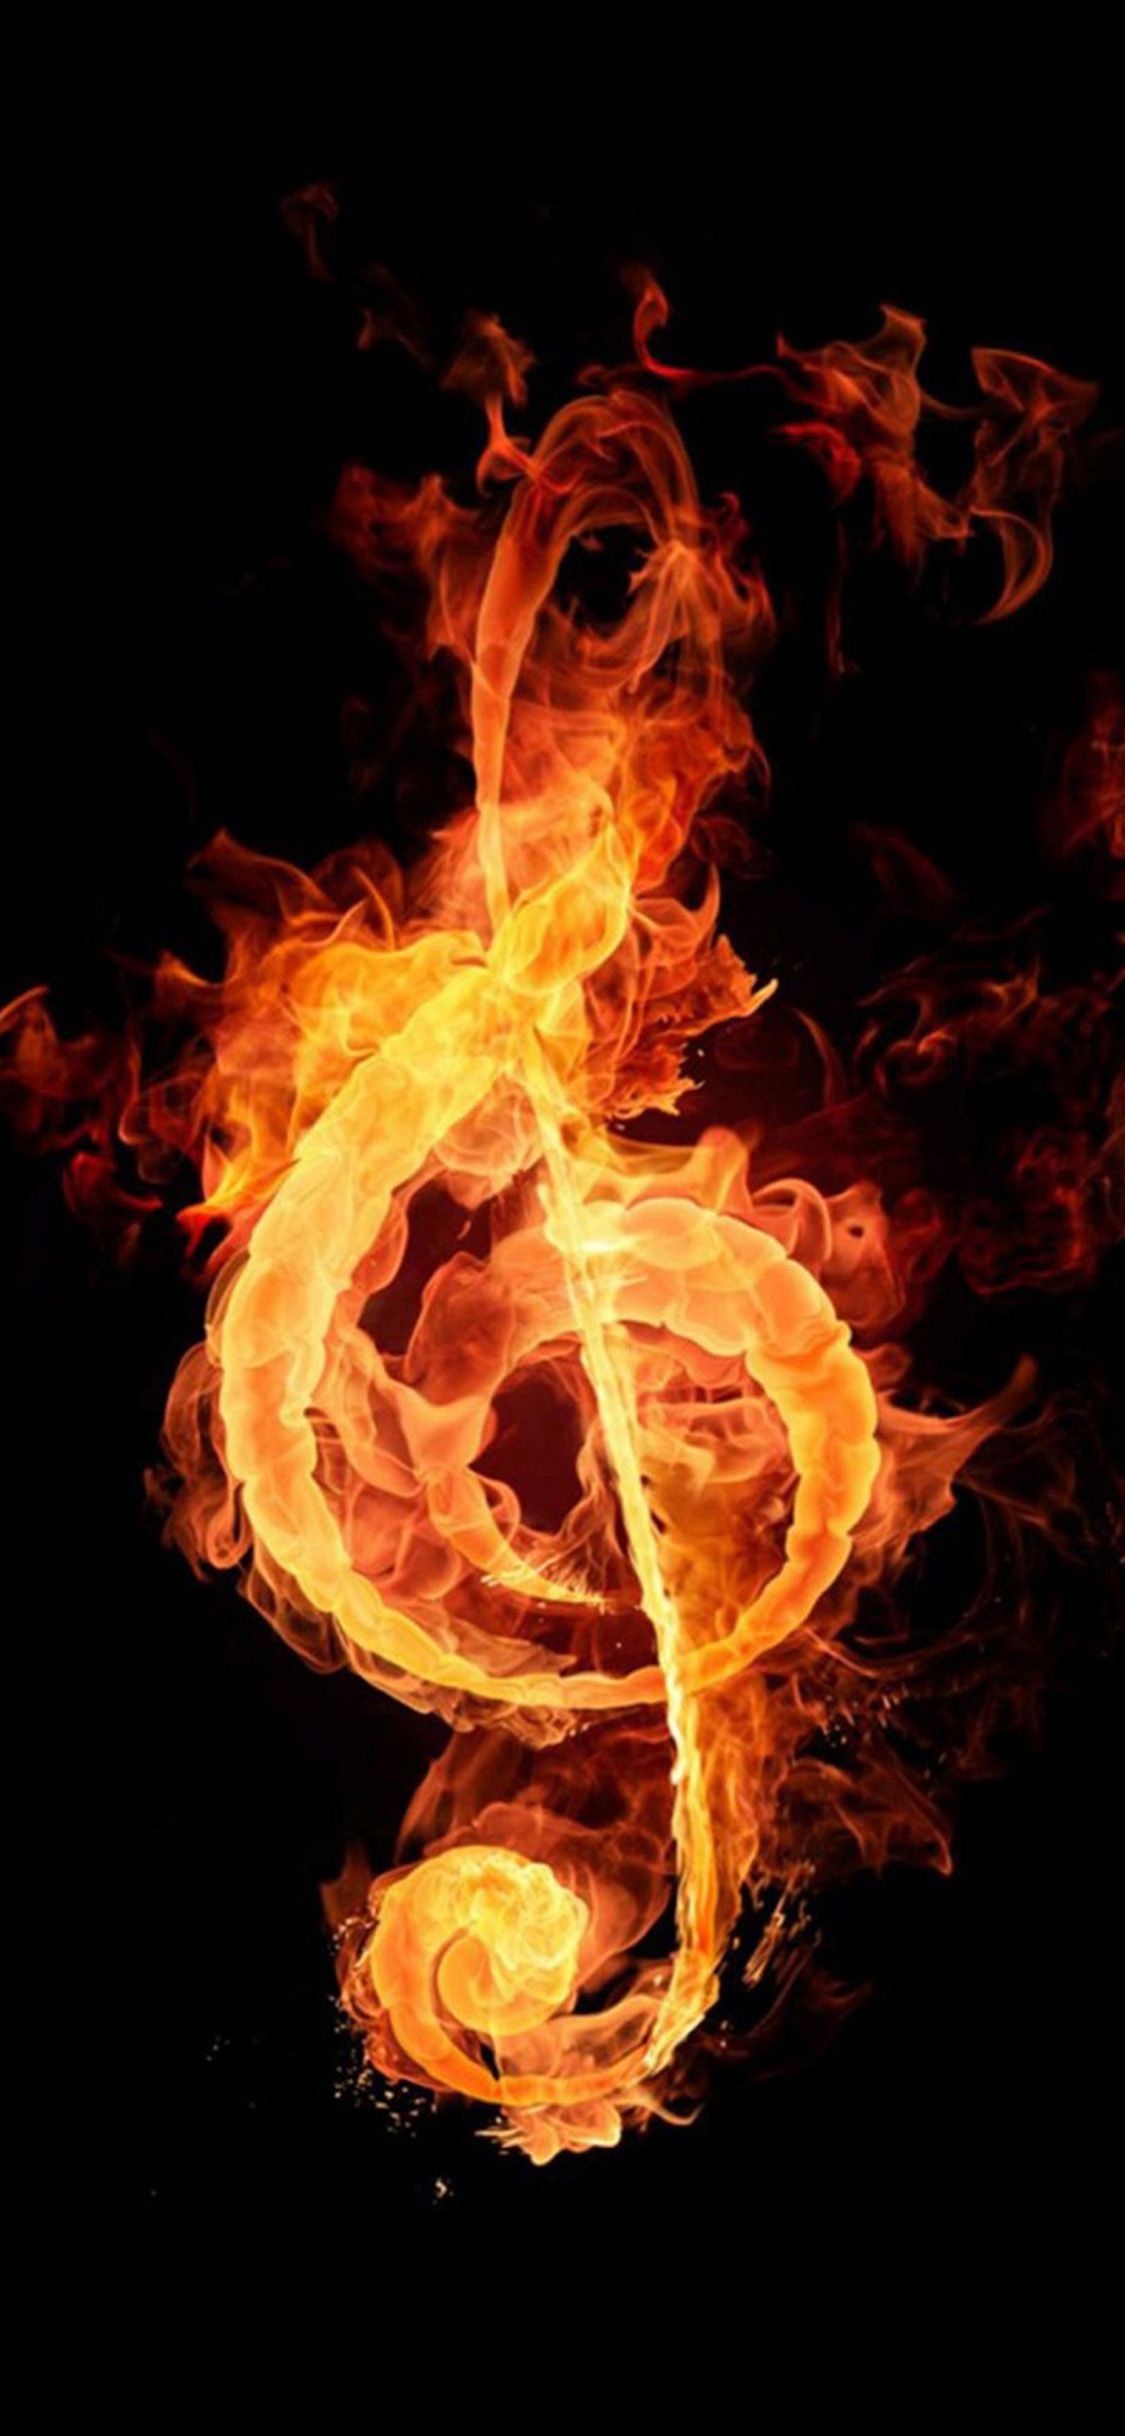 iPhone Fire Wallpaper Free iPhone Fire Background